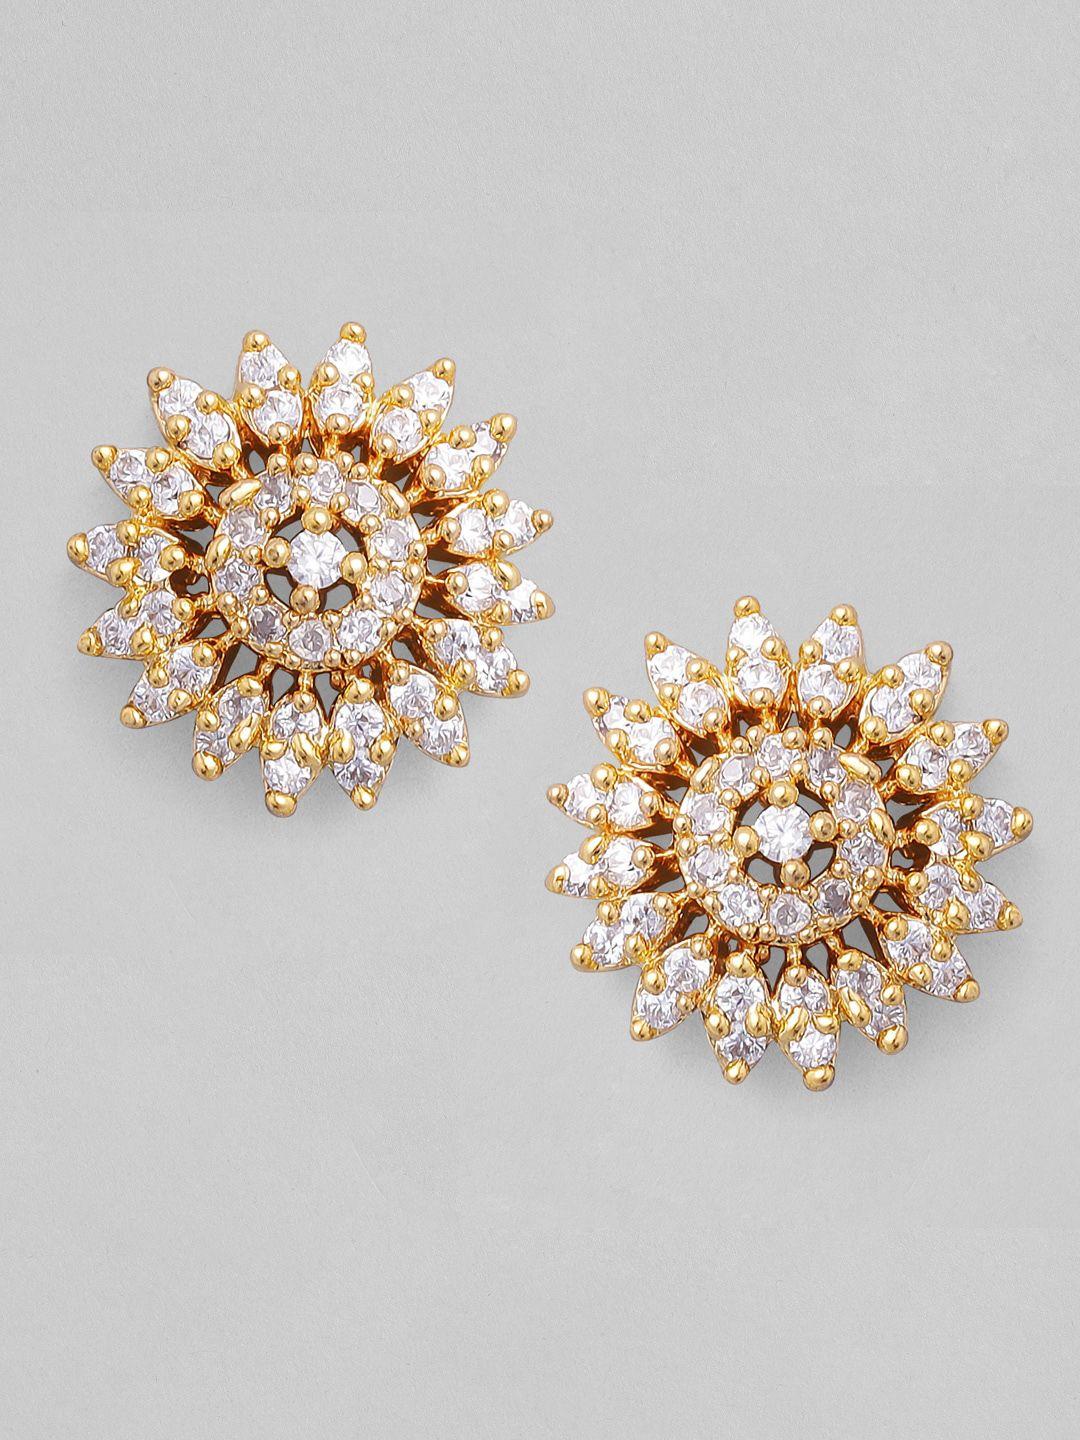 rubans gold-toned and plated contemporary studs earrings